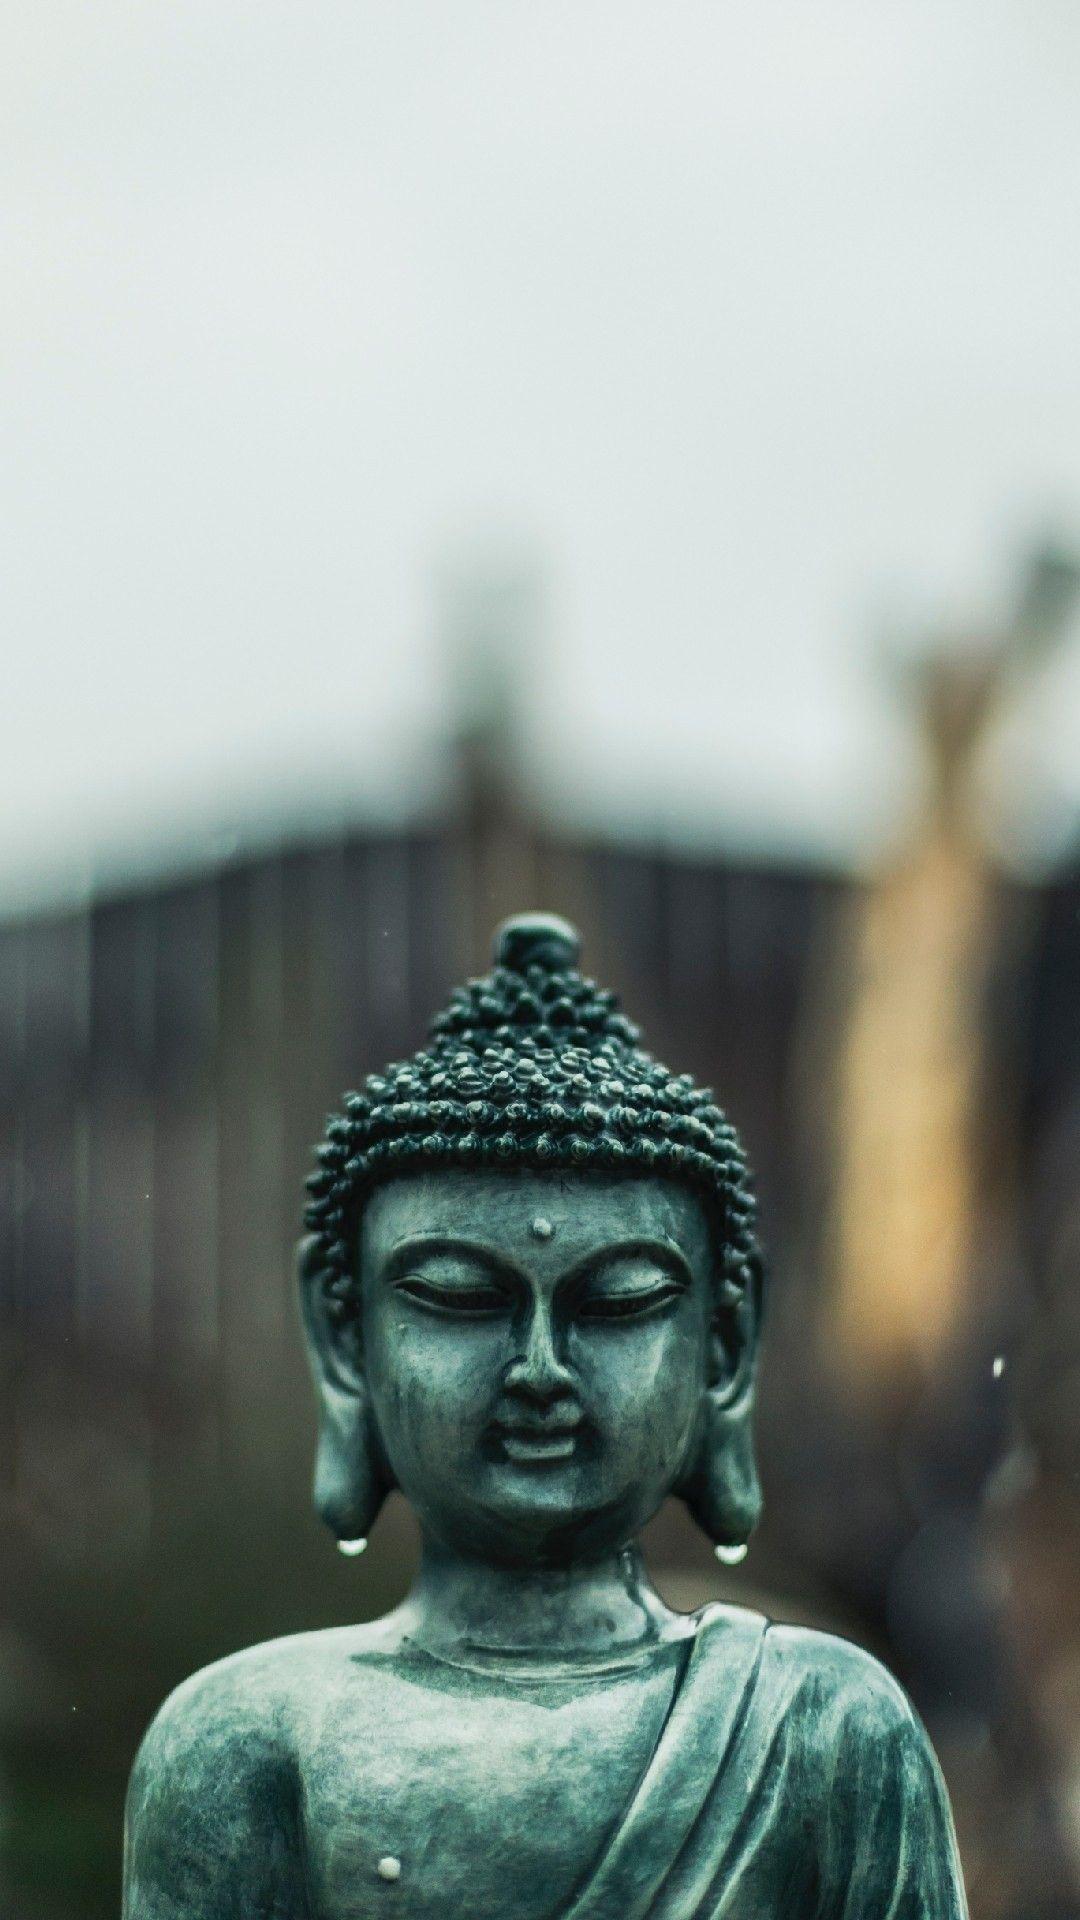 Top 25 Best Buddha iPhone Wallpapers  GettyWallpapers